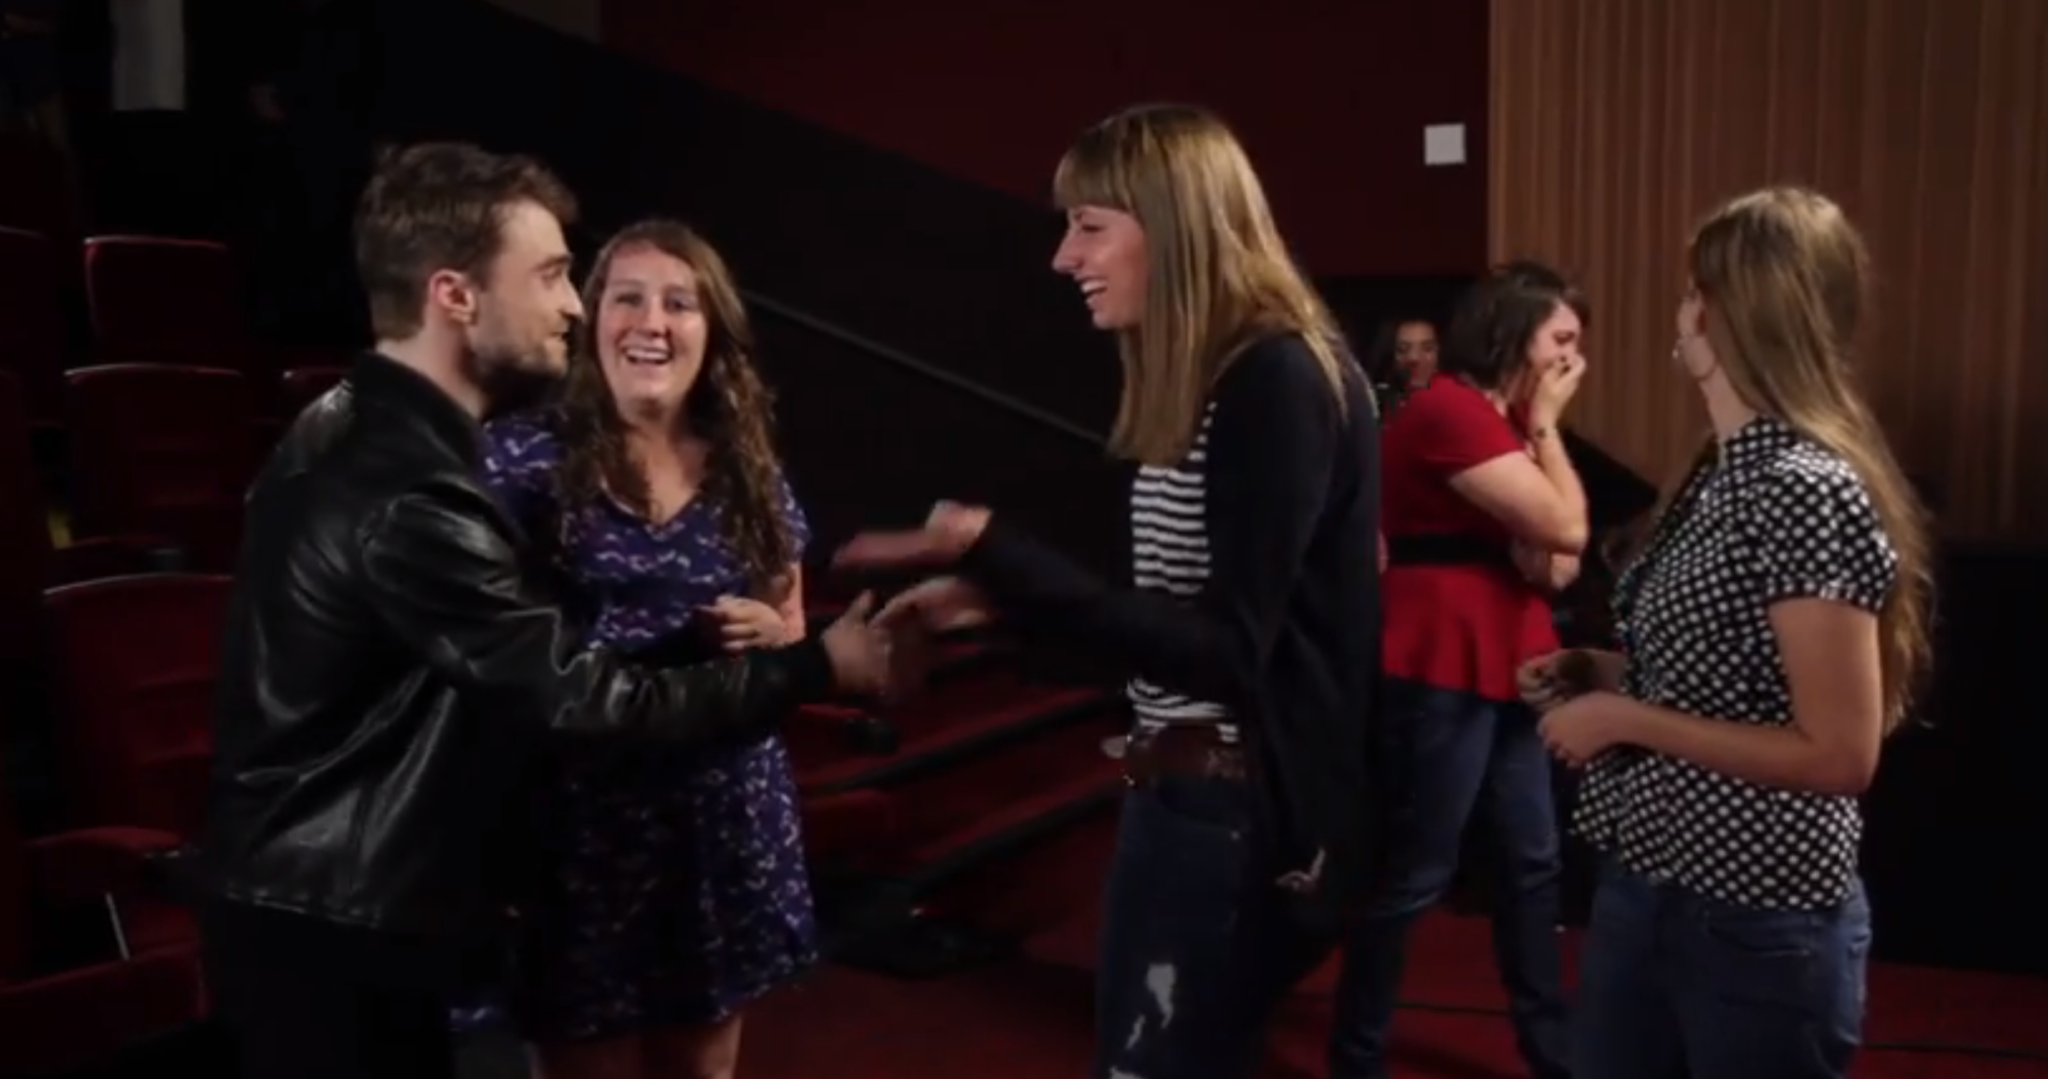 Daniel Radcliffe surprises fans at the What If screening.